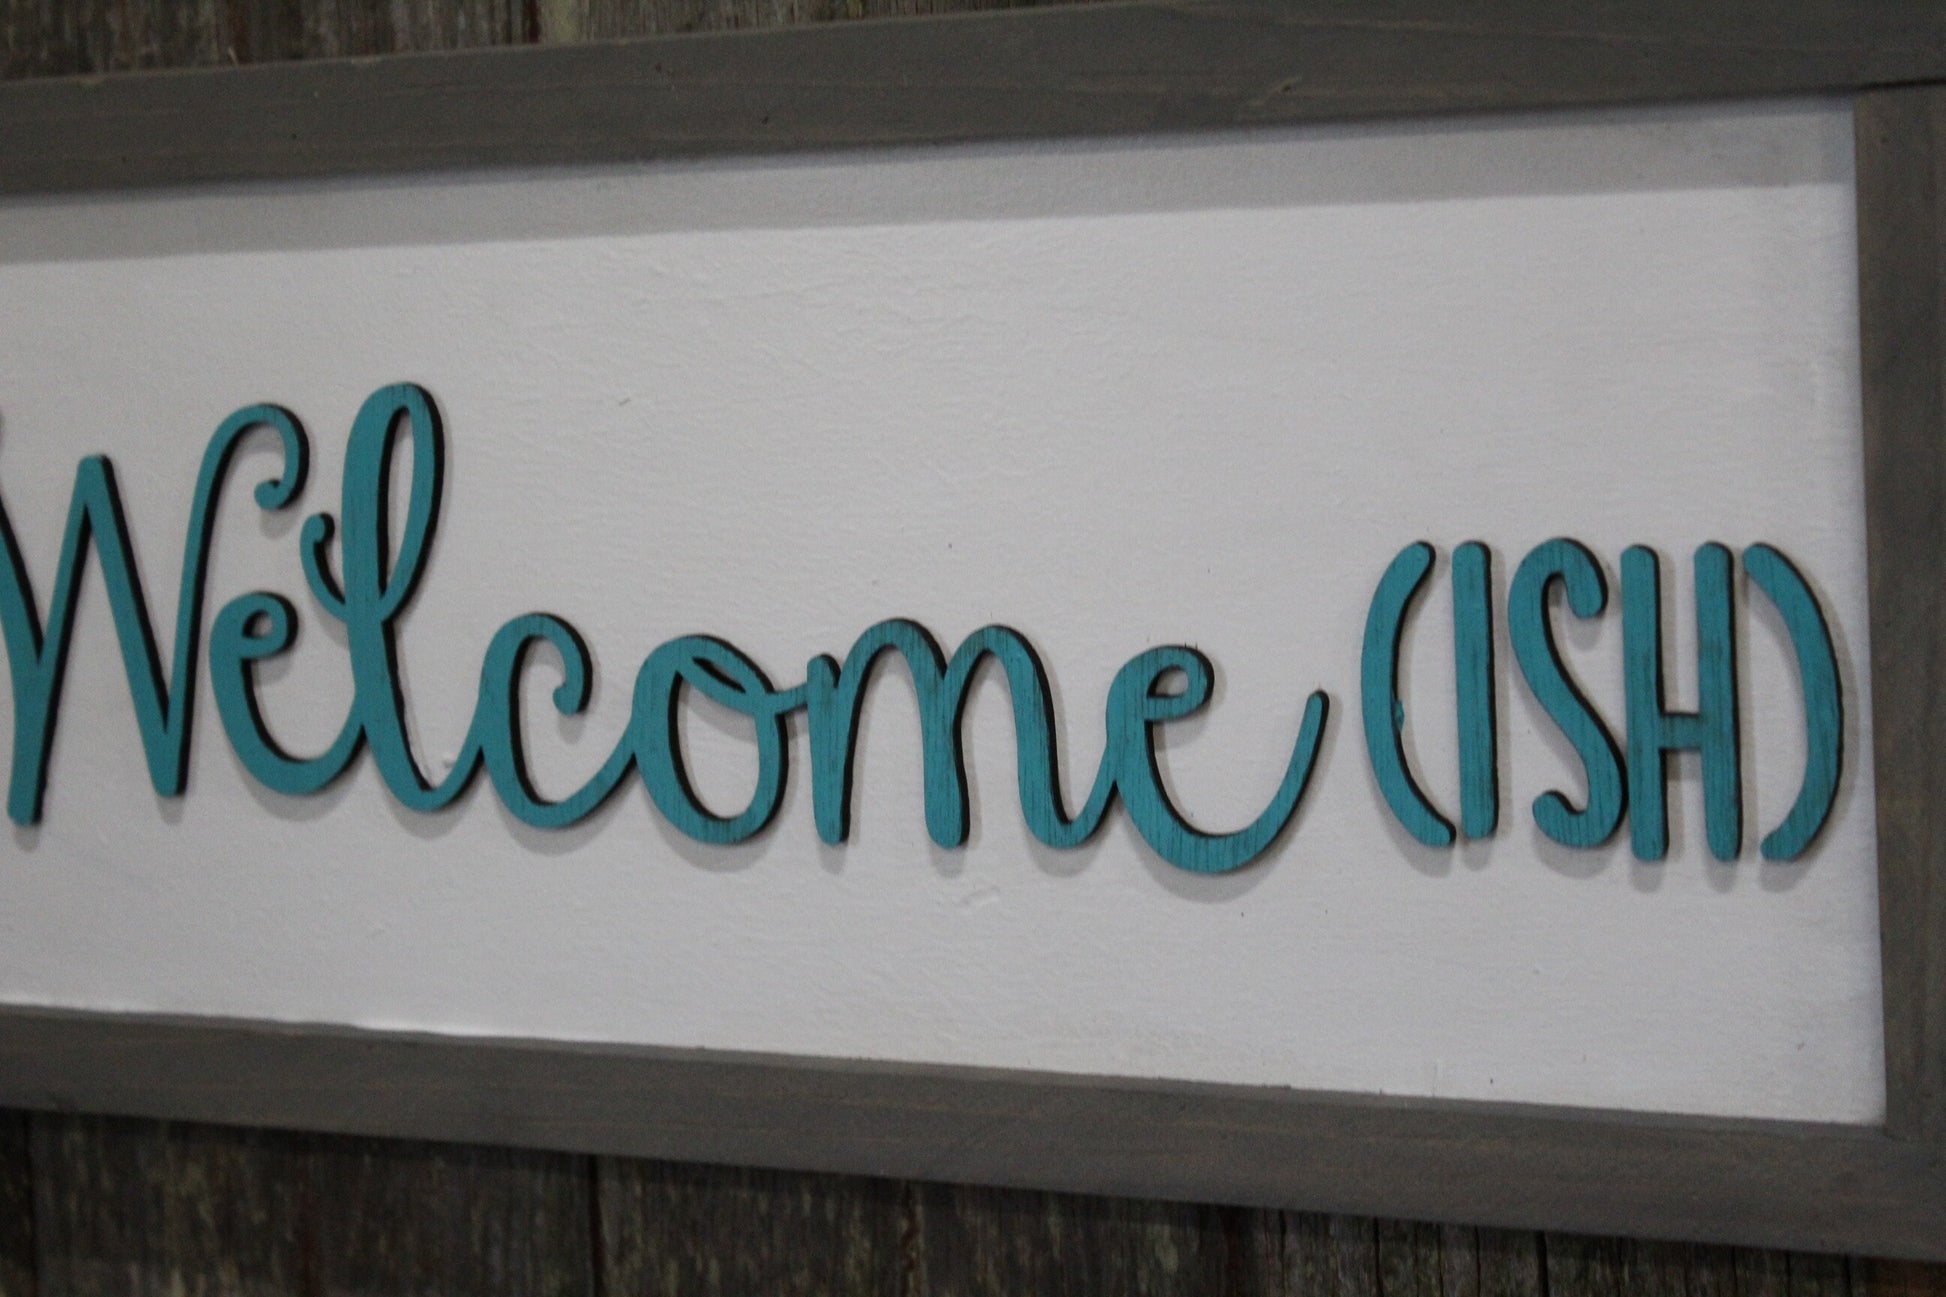 Welcome -ish Welcomeish Wood Sign 3D Raised Text Teal and Gray Font Script Funny Sign Farmhouse Rustic Primitive Framed Housewarming Gift